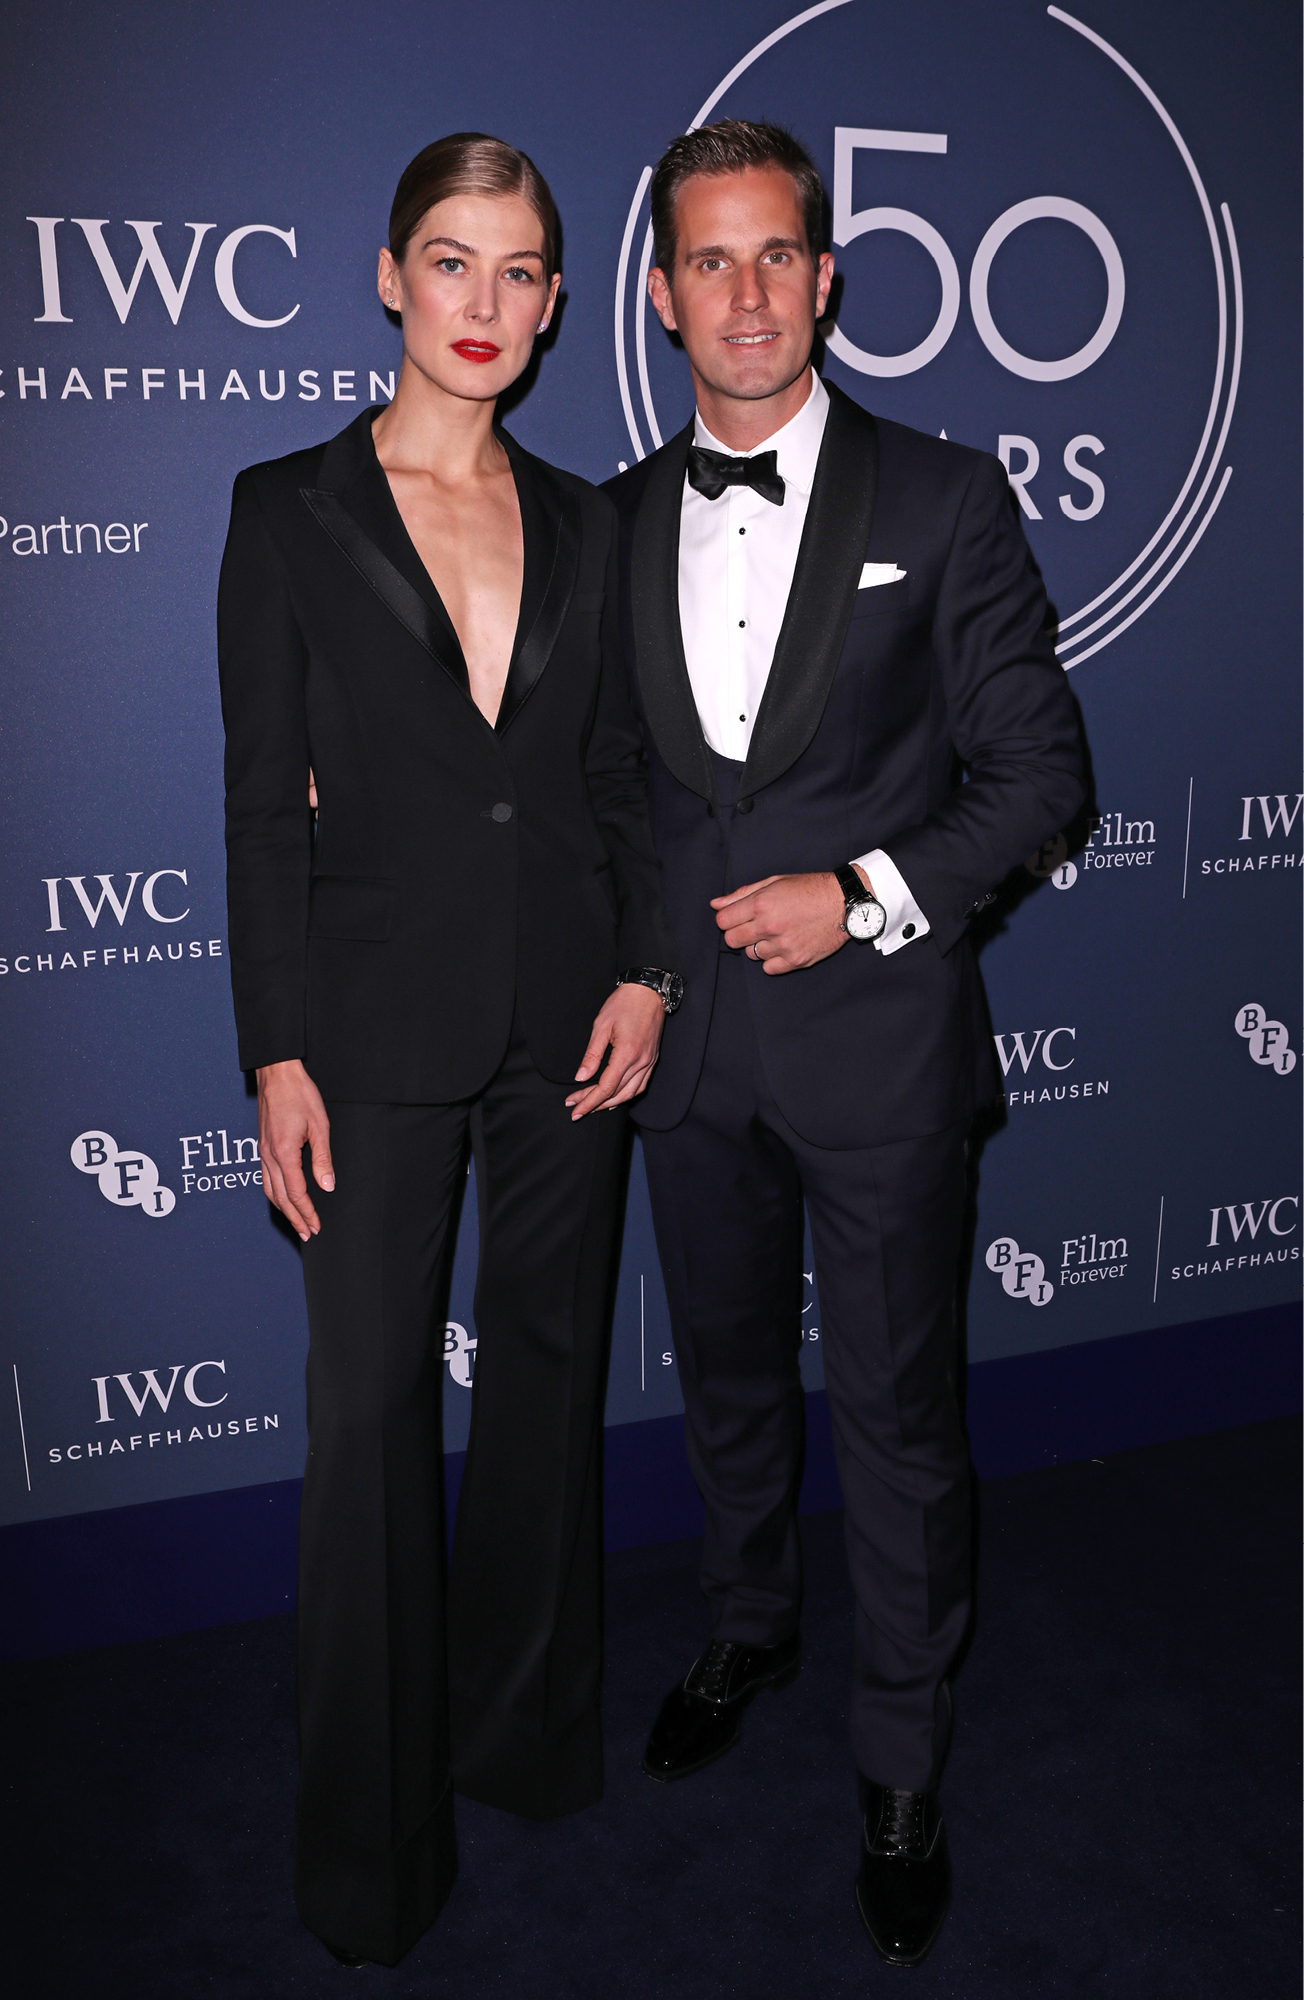 Rosamund Pike poses with IWC CEO Christoph Grainger-Herr